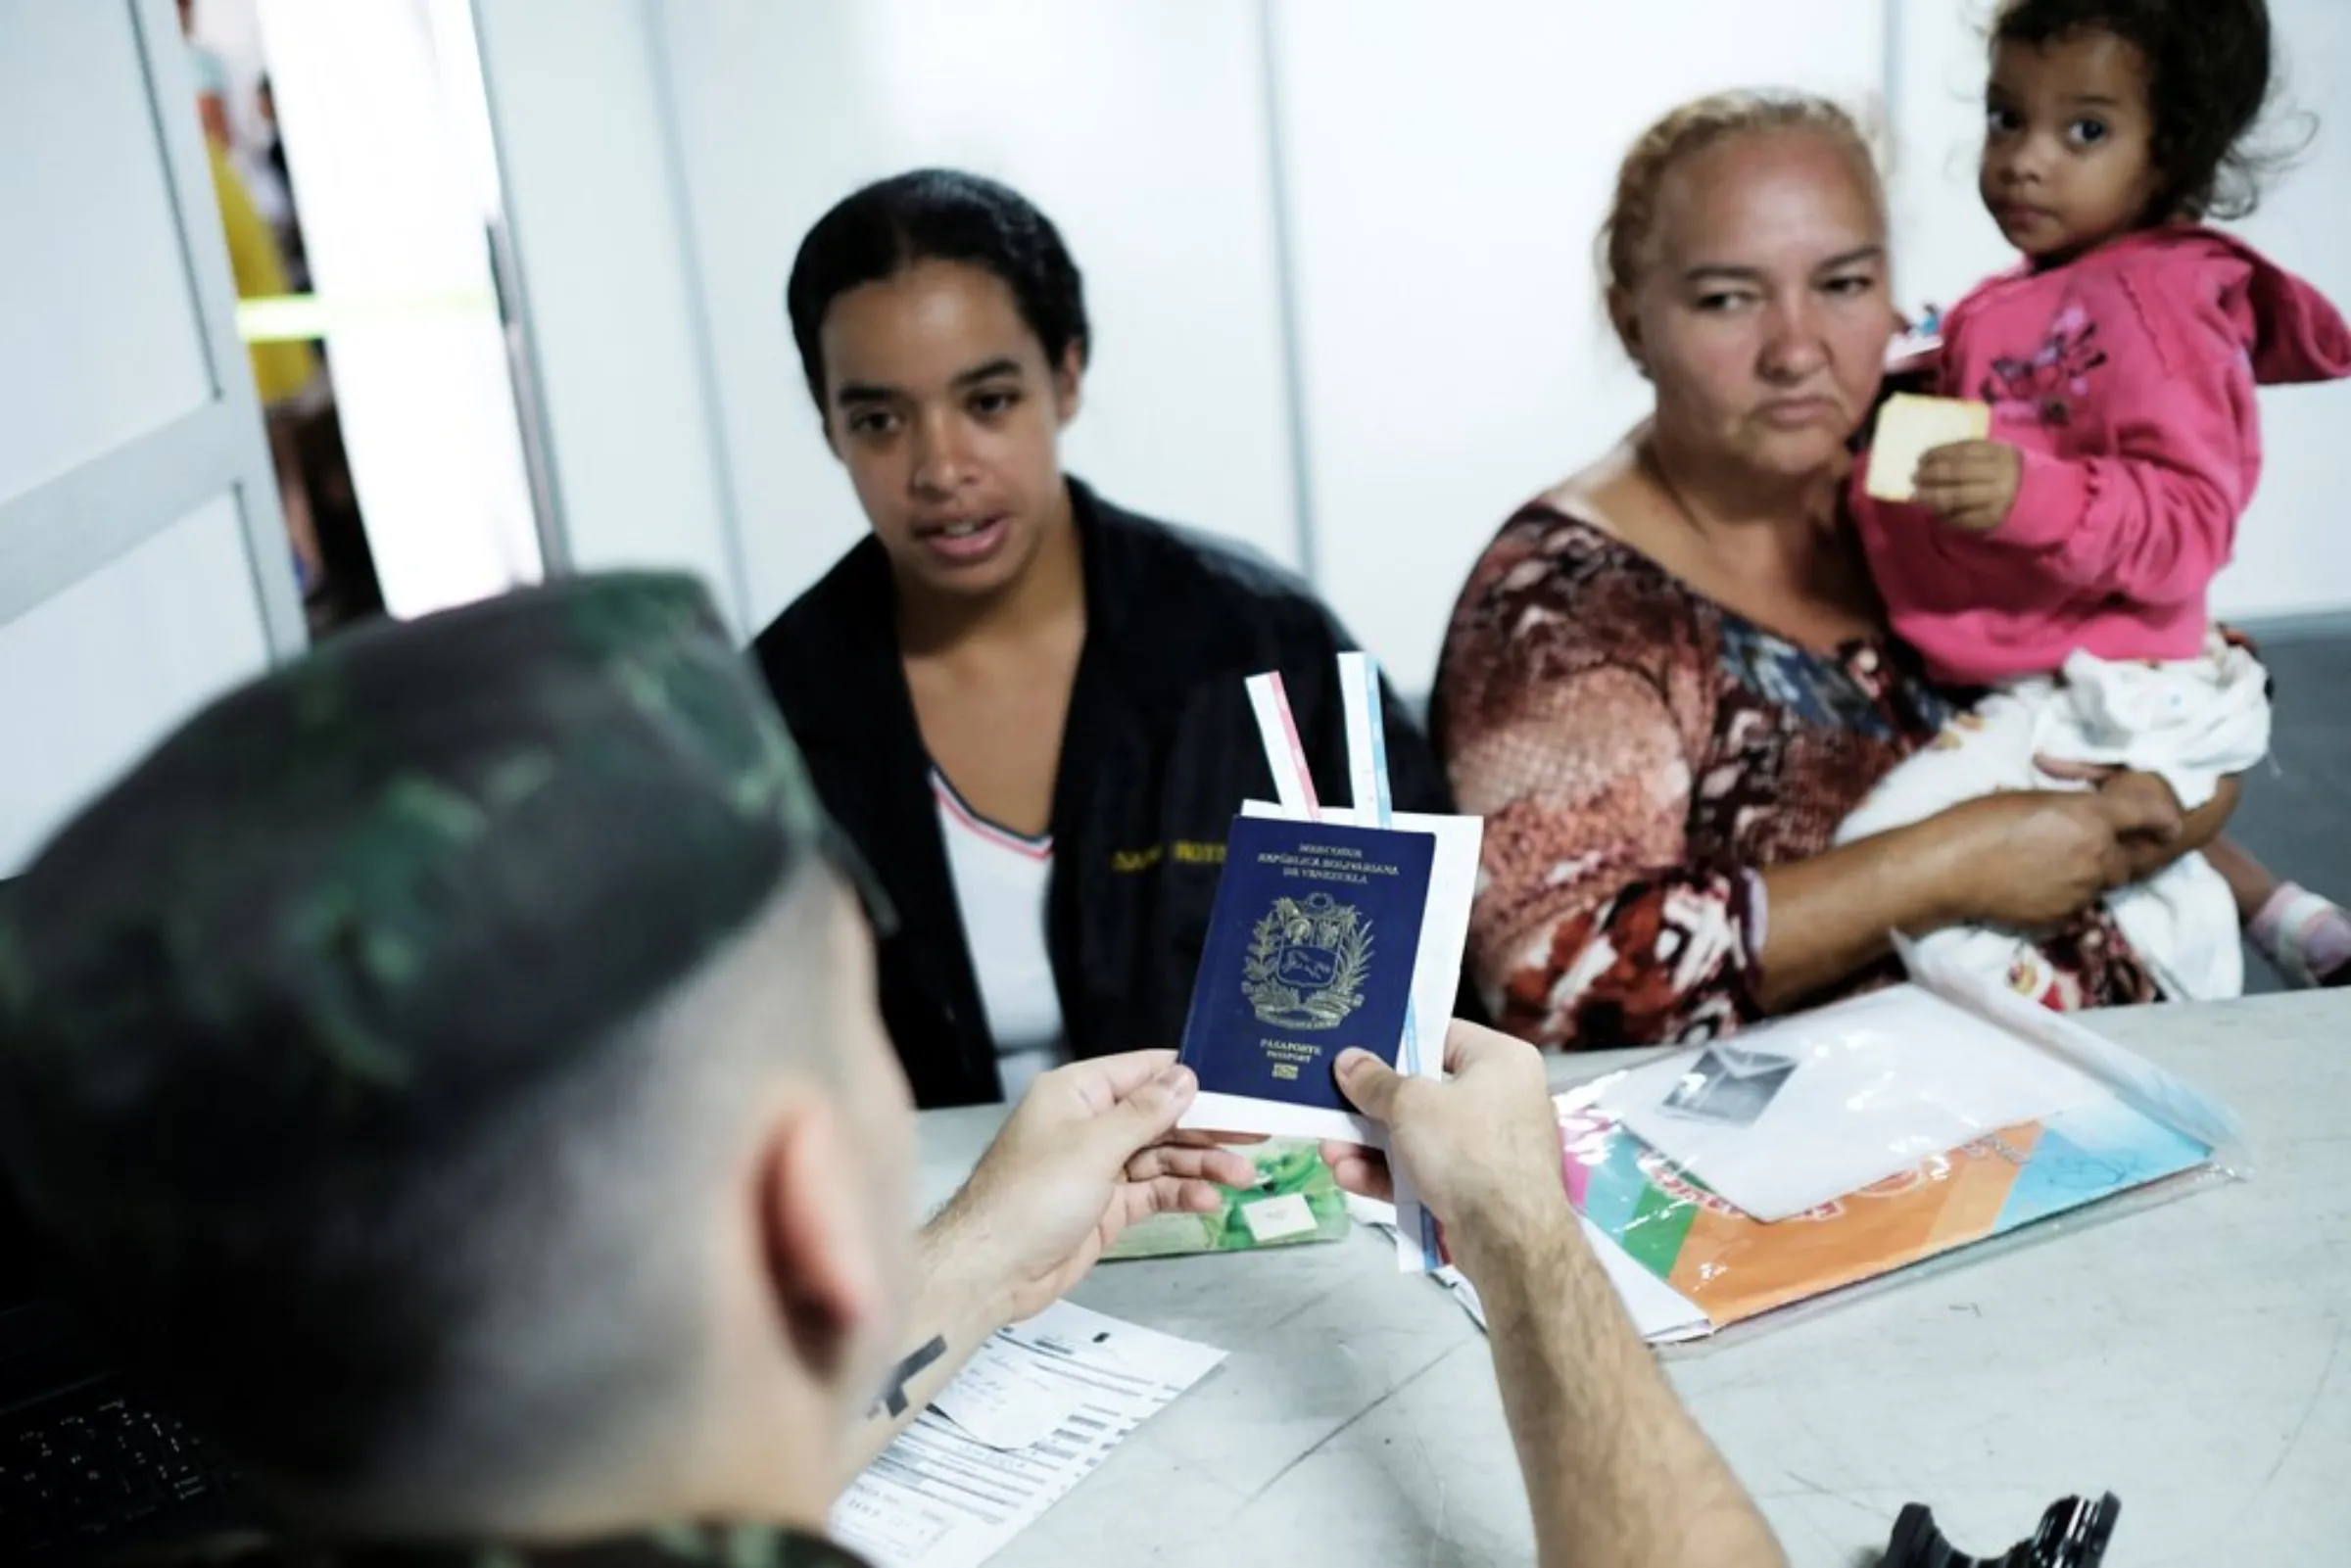 A military officer delivers a Venezuelan family's passports along with a medical inspection before they apply for refugee status, through the Federal Police and the United Nations High Commissioner for Refugees (UNHCR) at the Pacaraima border control, Roraima state, Brazil August 9, 2018